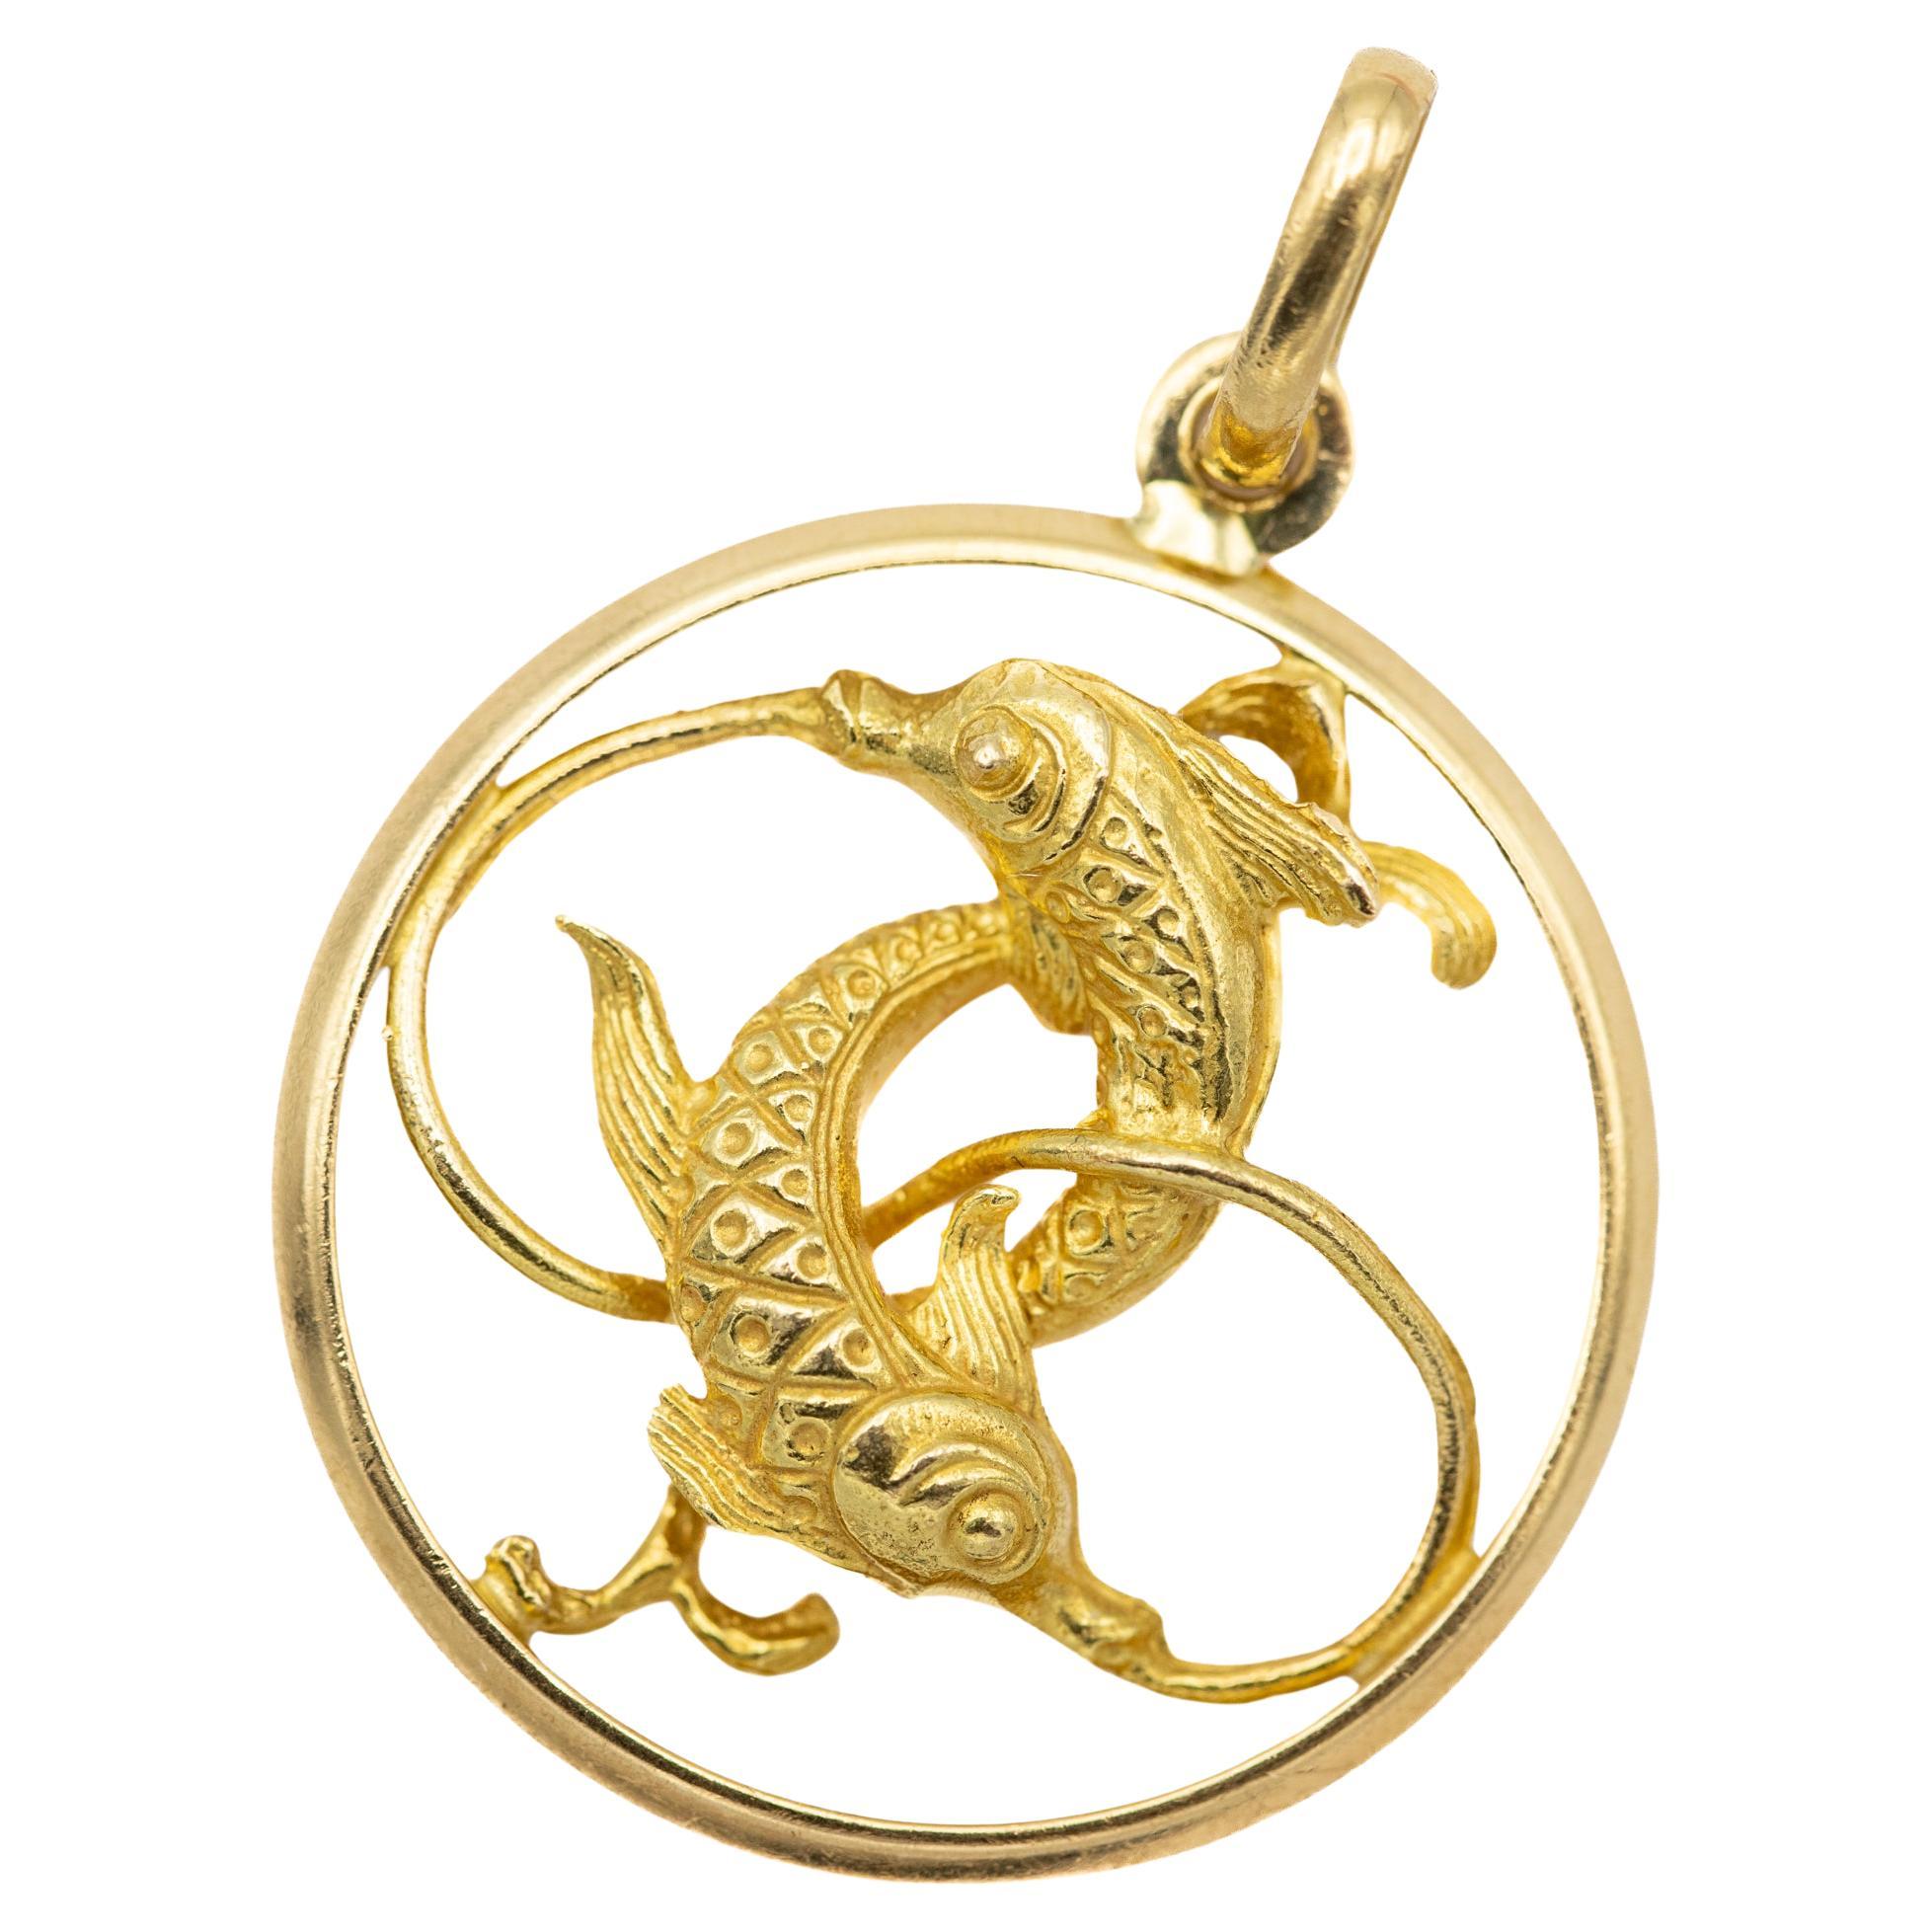 XL Large 18k zodiac charm pendant - Pisces medallion - solid yellow gold For Sale